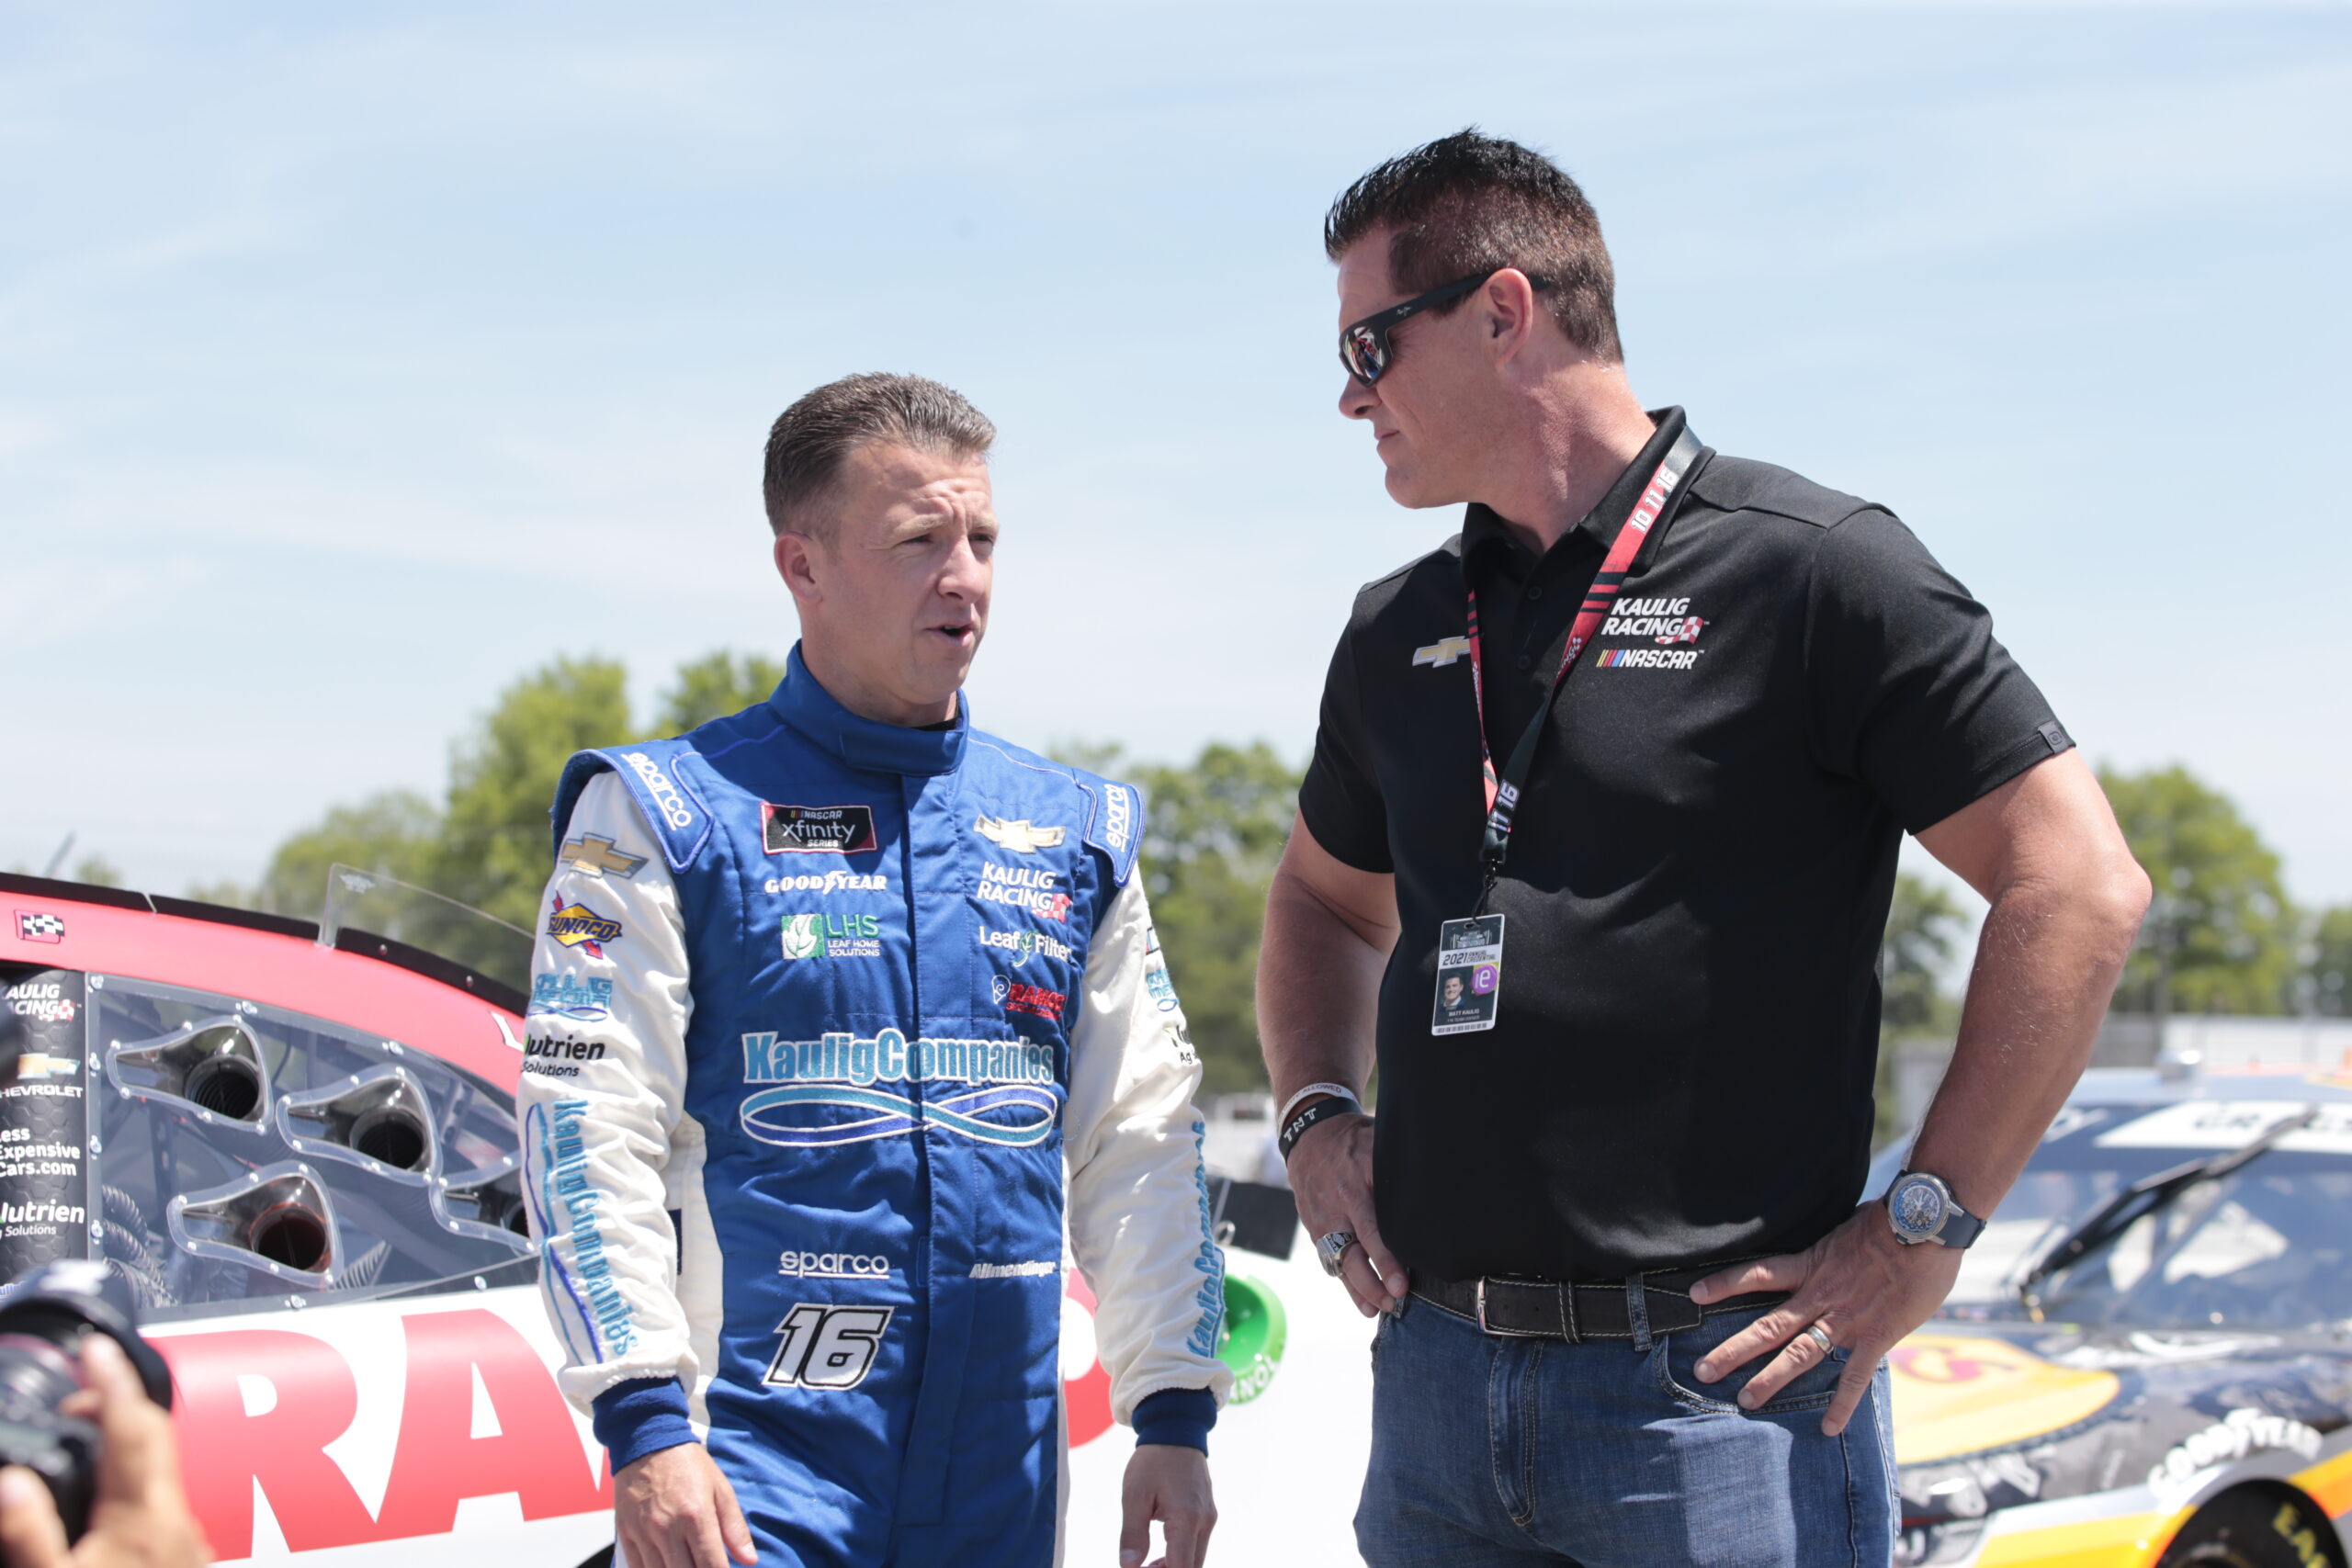 For one thing, Allmendinger continually adds to car owner Matt Kaulig's building NASCAR success. (Photo: Stephen Conley/The Podium Finish)